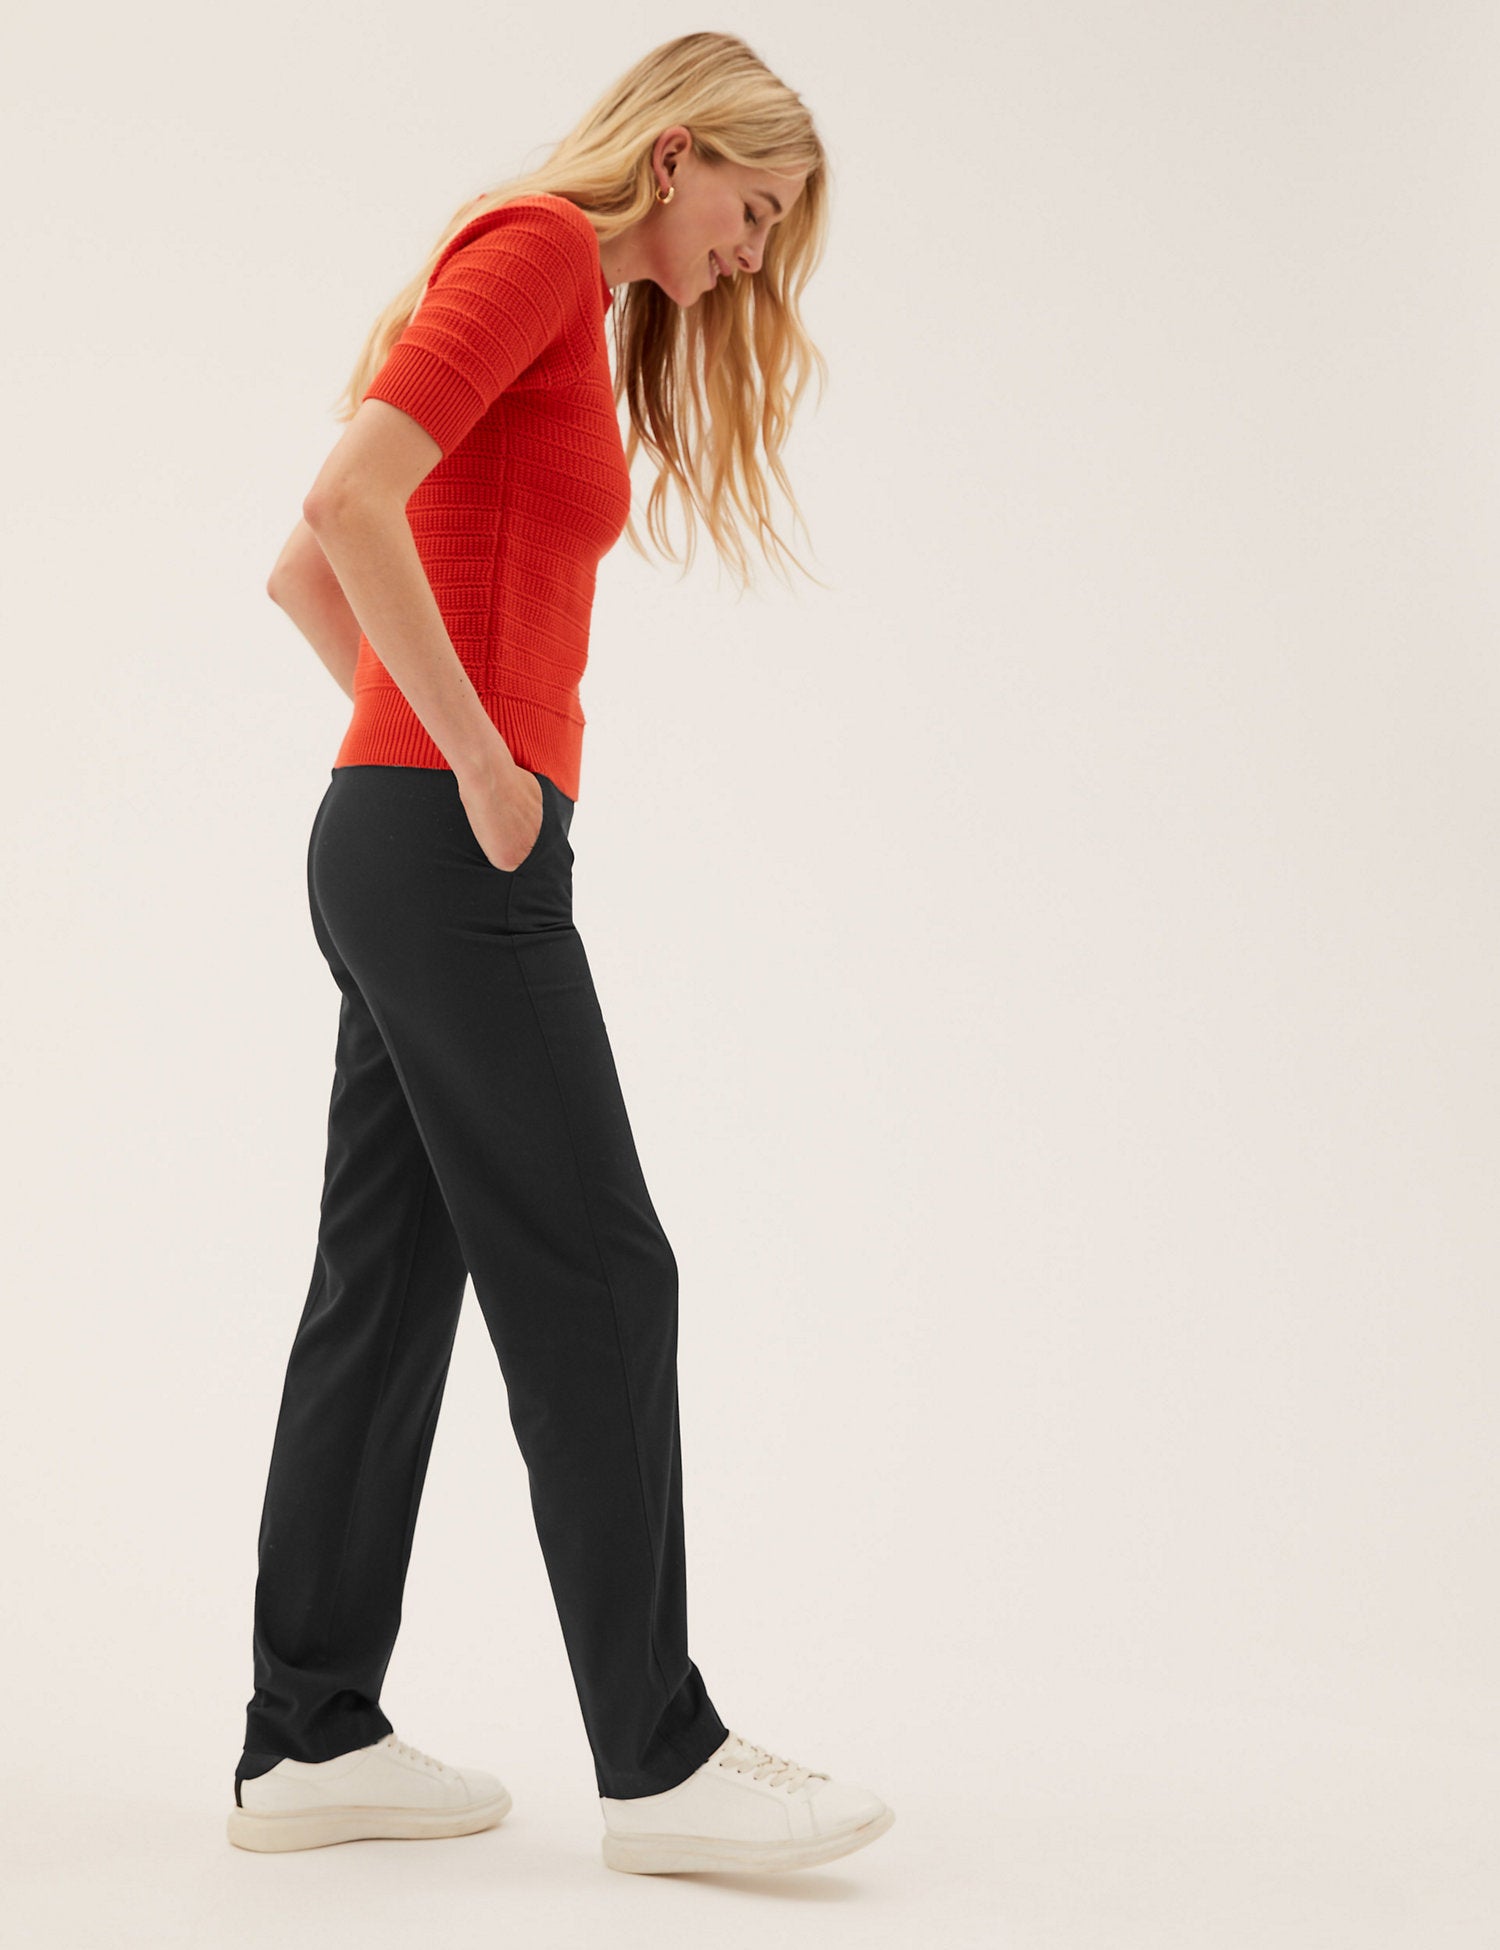 Straight Leg Trousers with Stretch